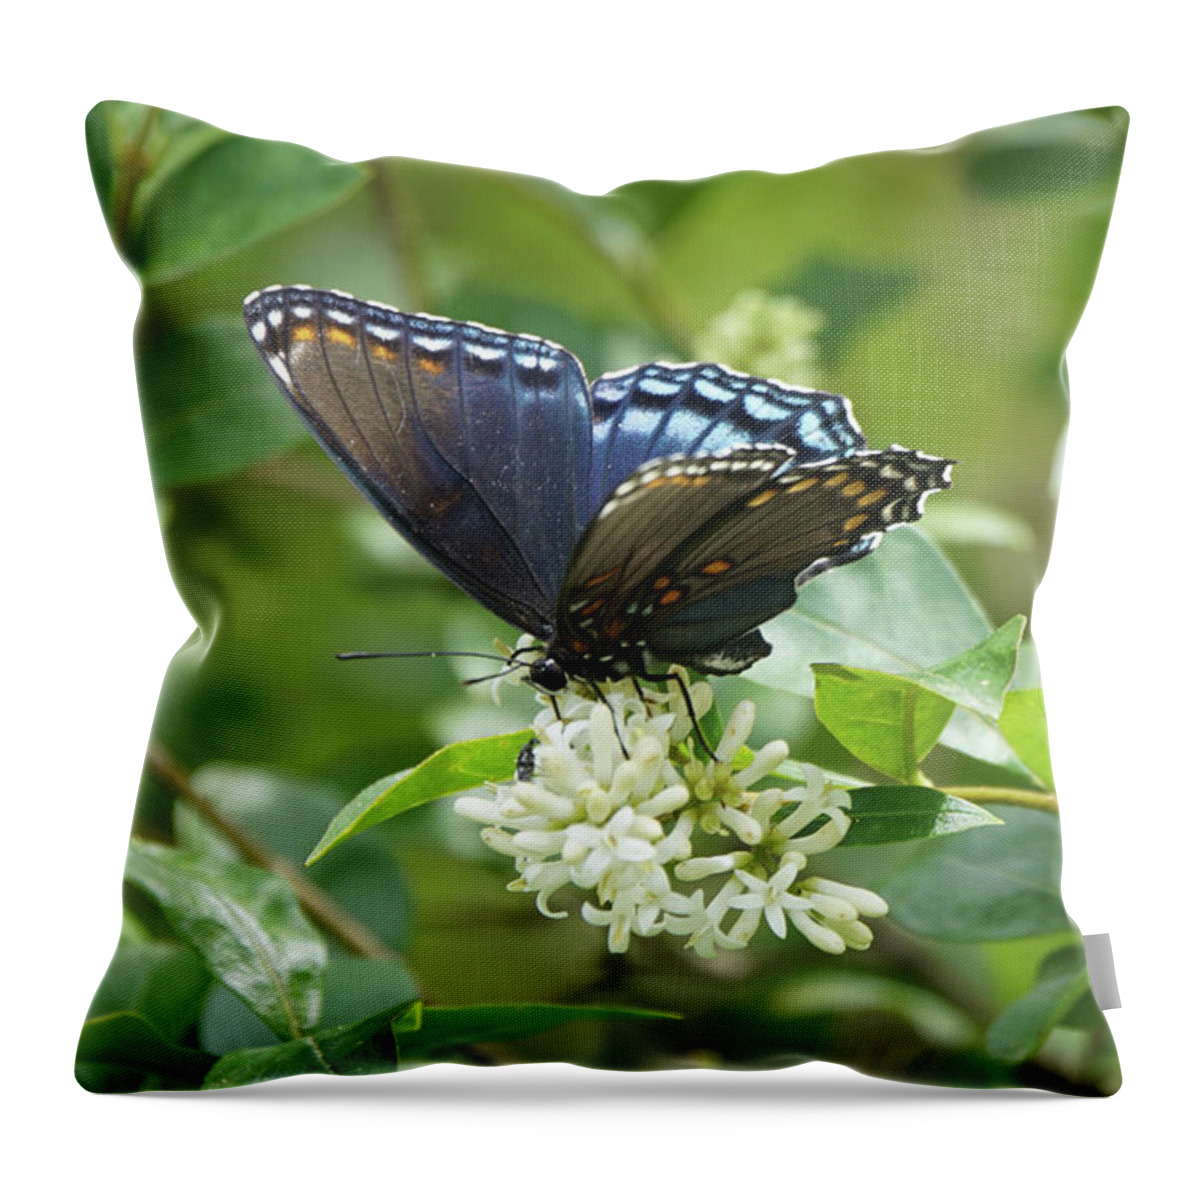 Red-spotted Purple Butterfly Throw Pillow featuring the photograph Red-spotted Purple Butterfly on Privet Flowers by Robert E Alter Reflections of Infinity